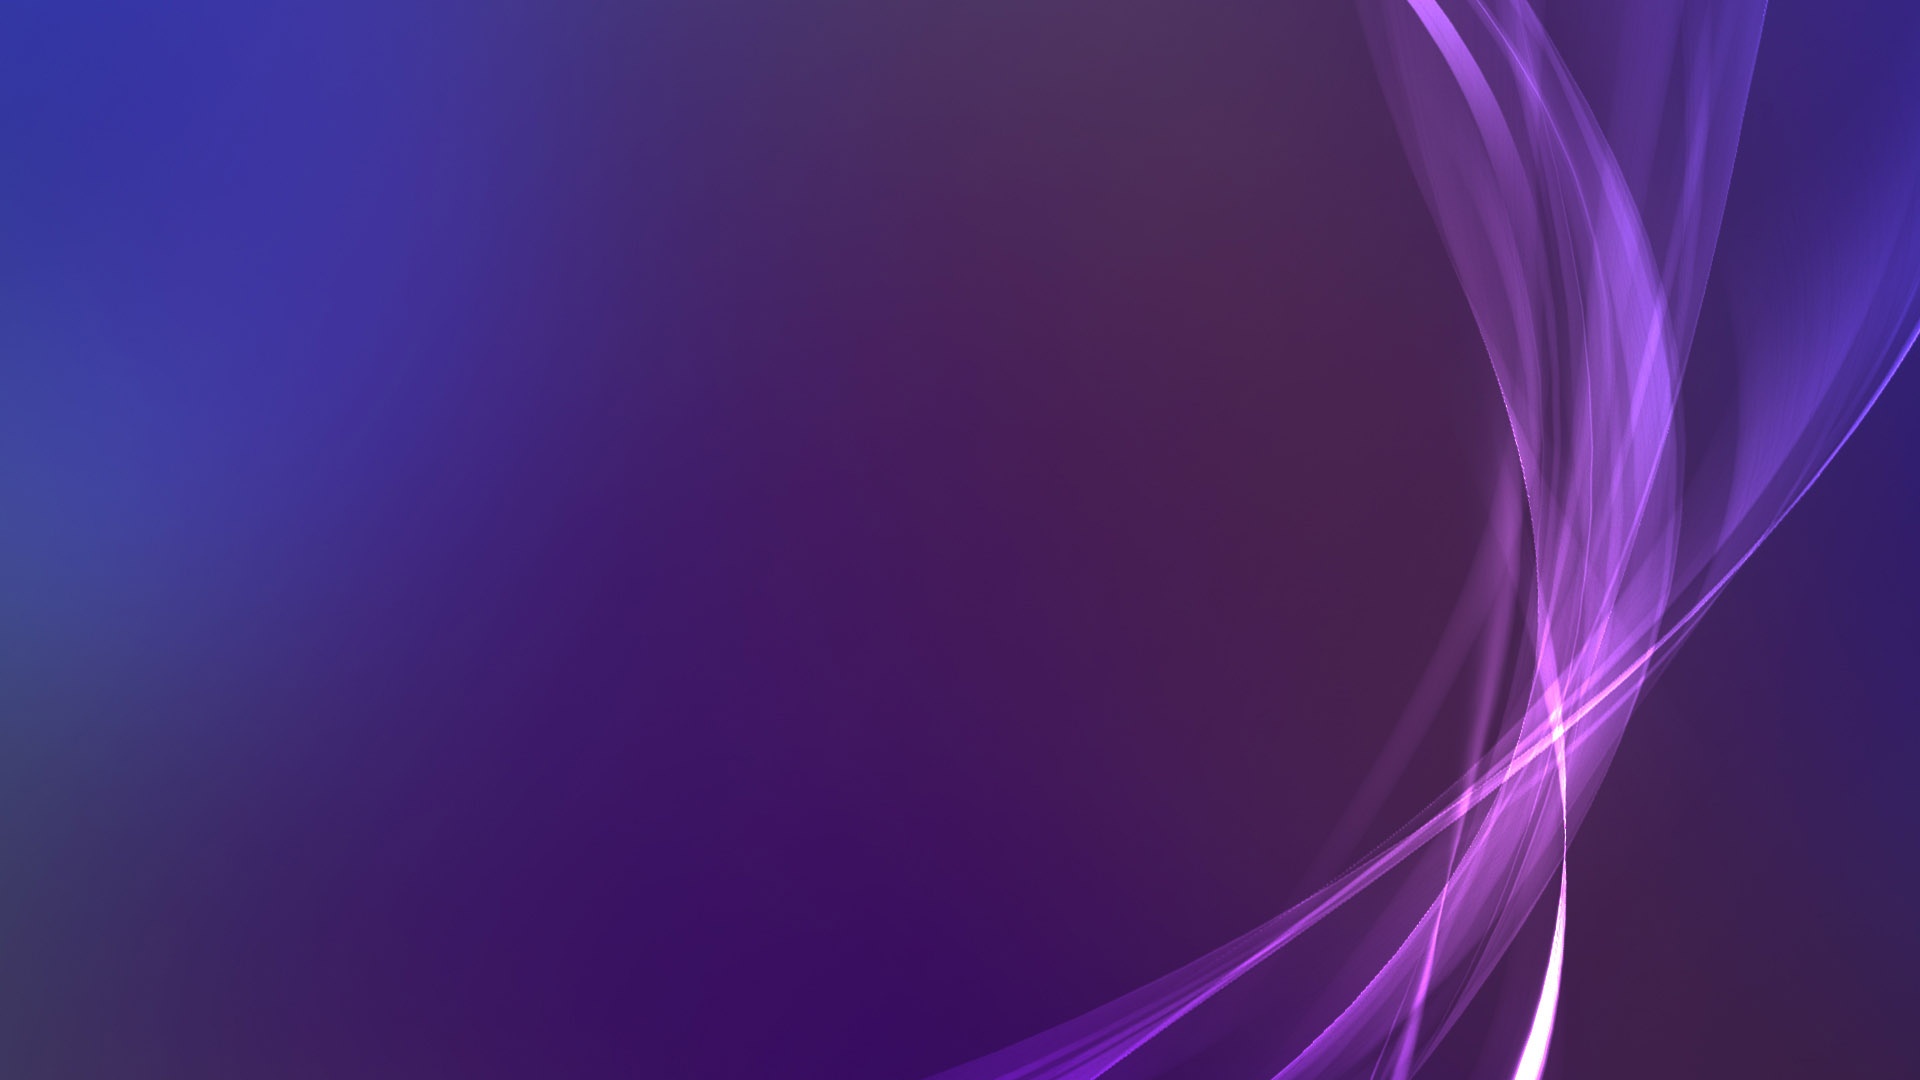 Purple Backround 1920x1080 HD Image Abstract 3D 1920x1080